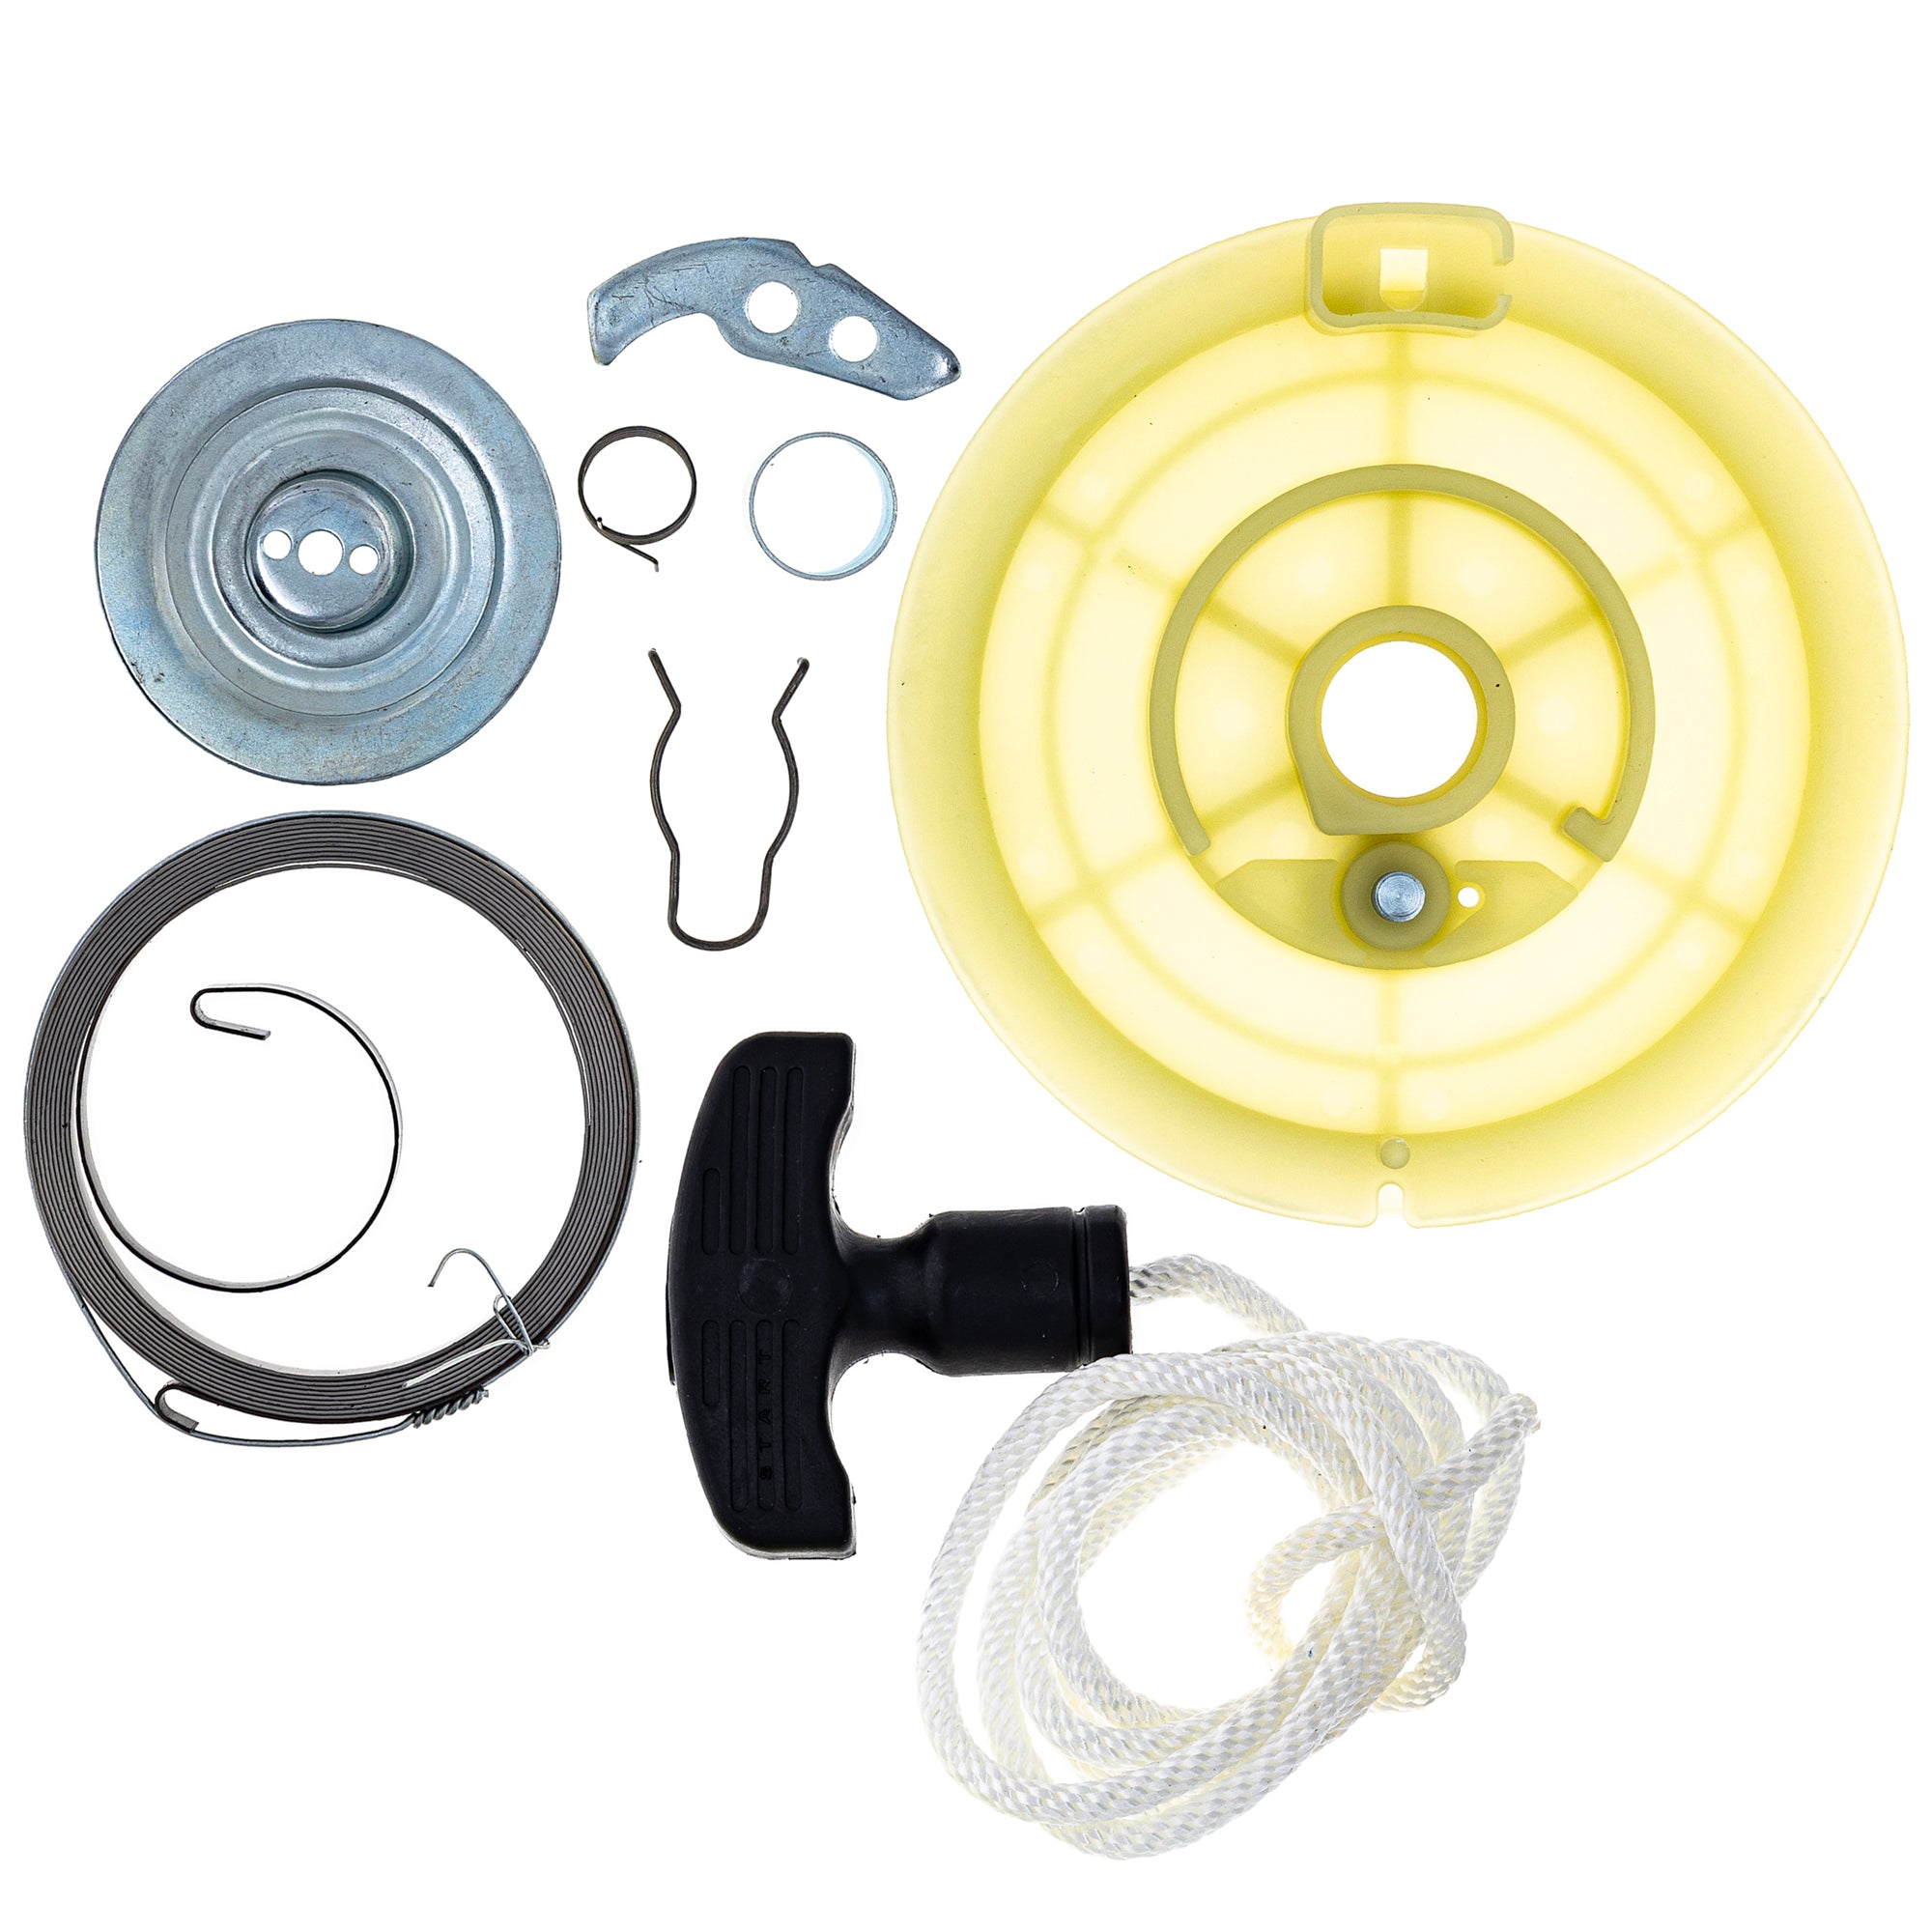 Recoil Pull Cord Starter Kit for Polaris Xpress Xplorer Xpedition Worker 79191469 3090085 NICHE 519-CRS2223A